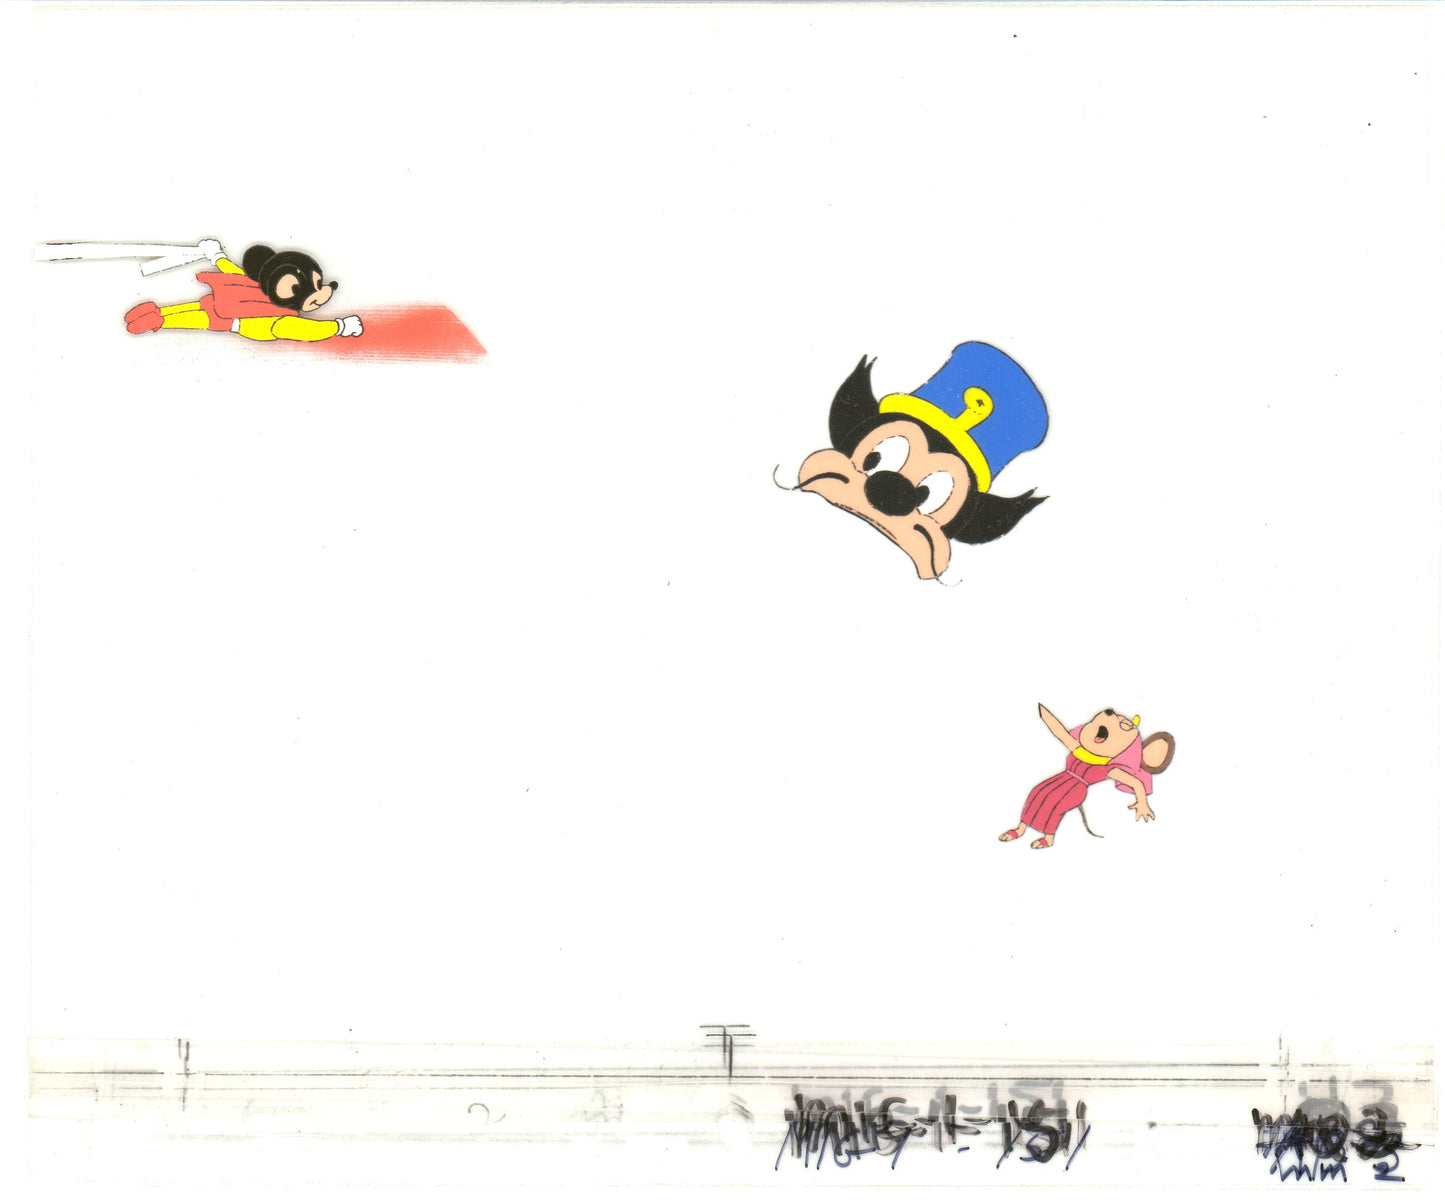 Mighty Mouse Cartoon Production Animation Cel Setup from Filmation Anime 1979-80 B2012